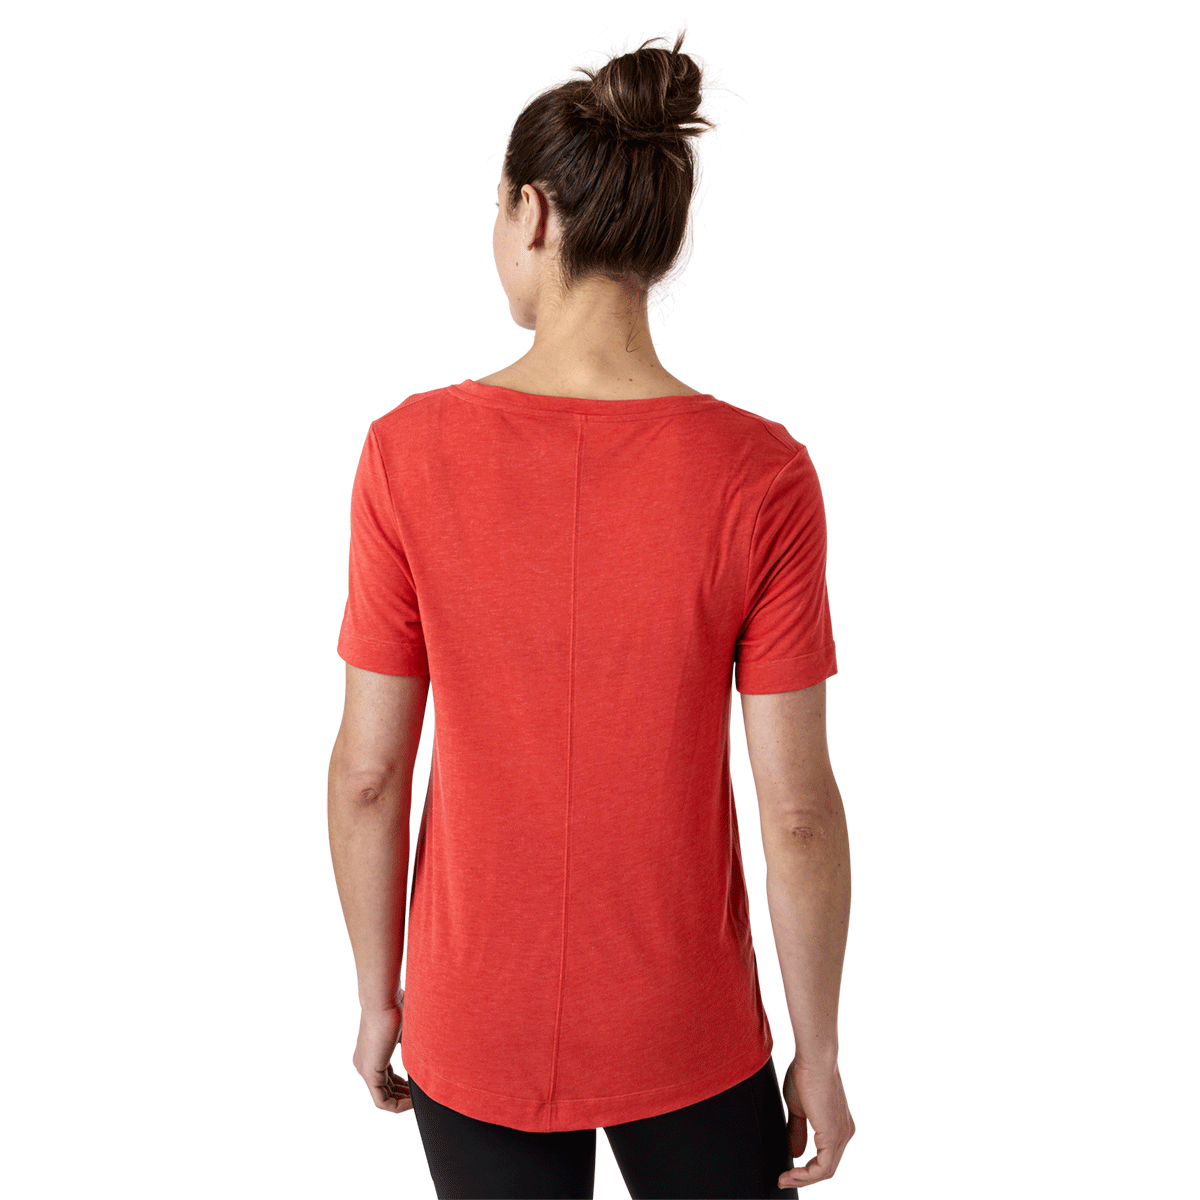 products/s21_w_paseo_travel_tee_terracotta_back_ab795362-70b5-4c04-93f5-9f46cef3ac77.png